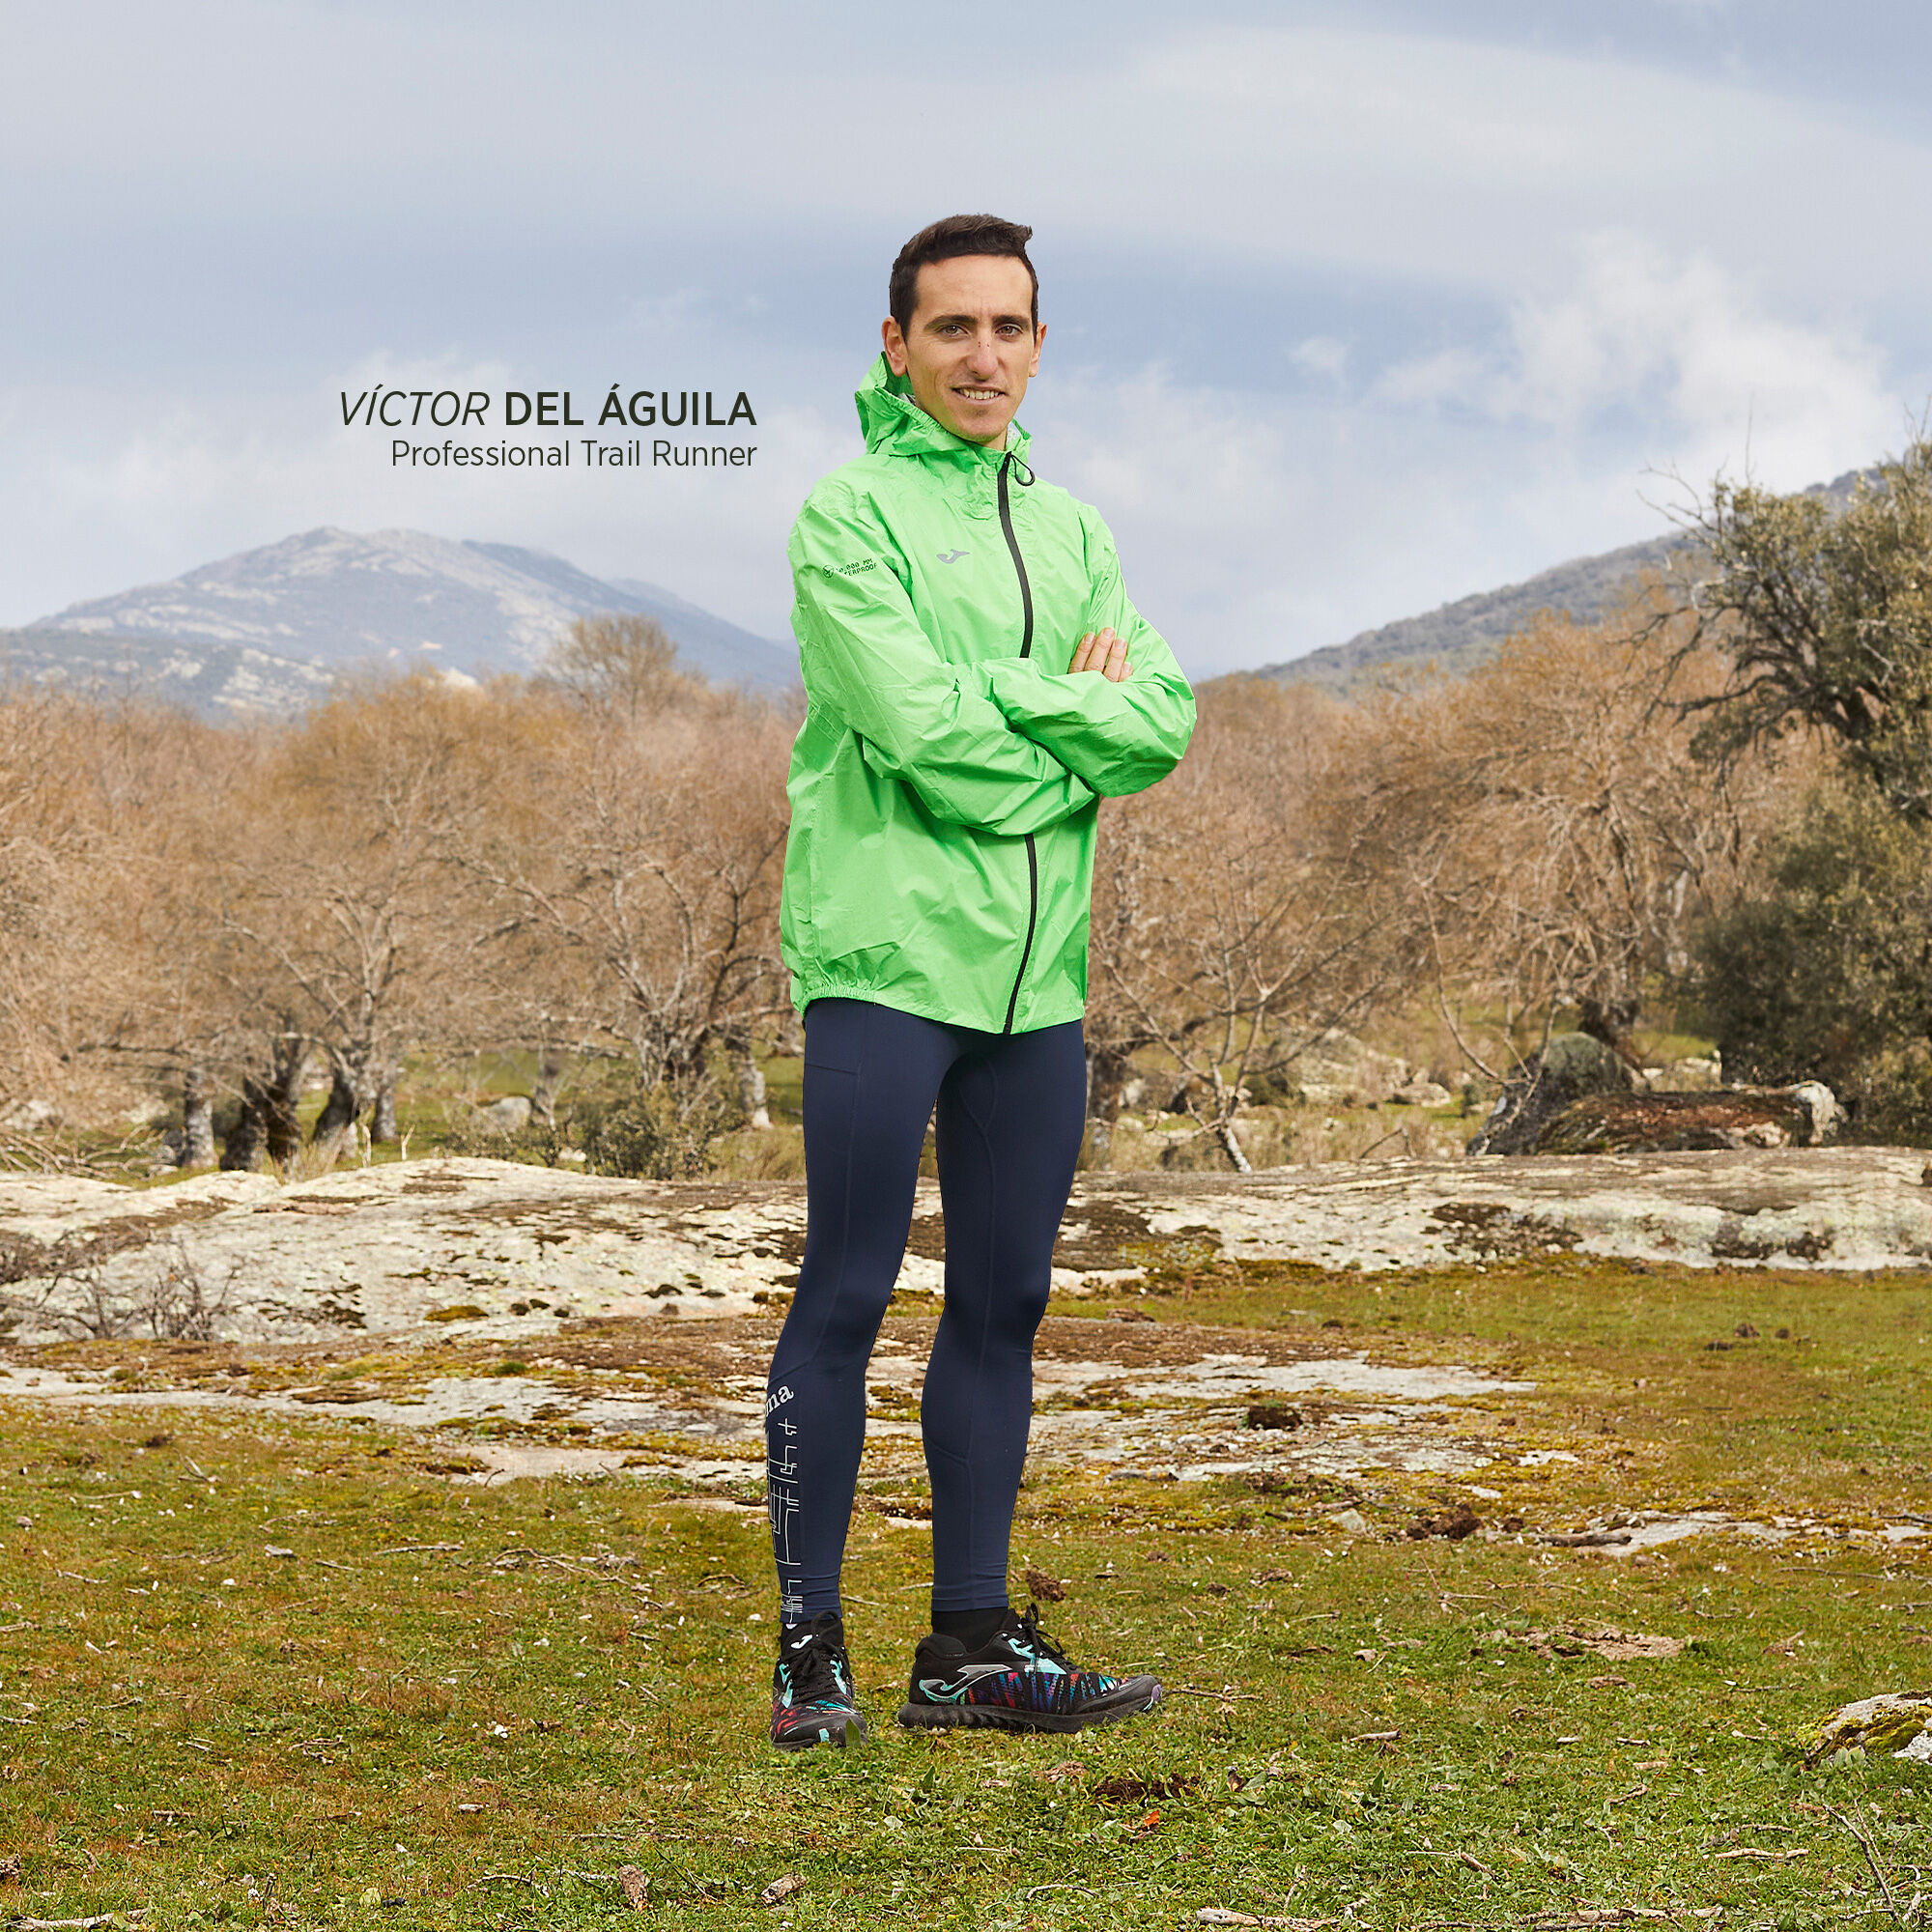 Imperméable homme R-Night Iconic vert fluo